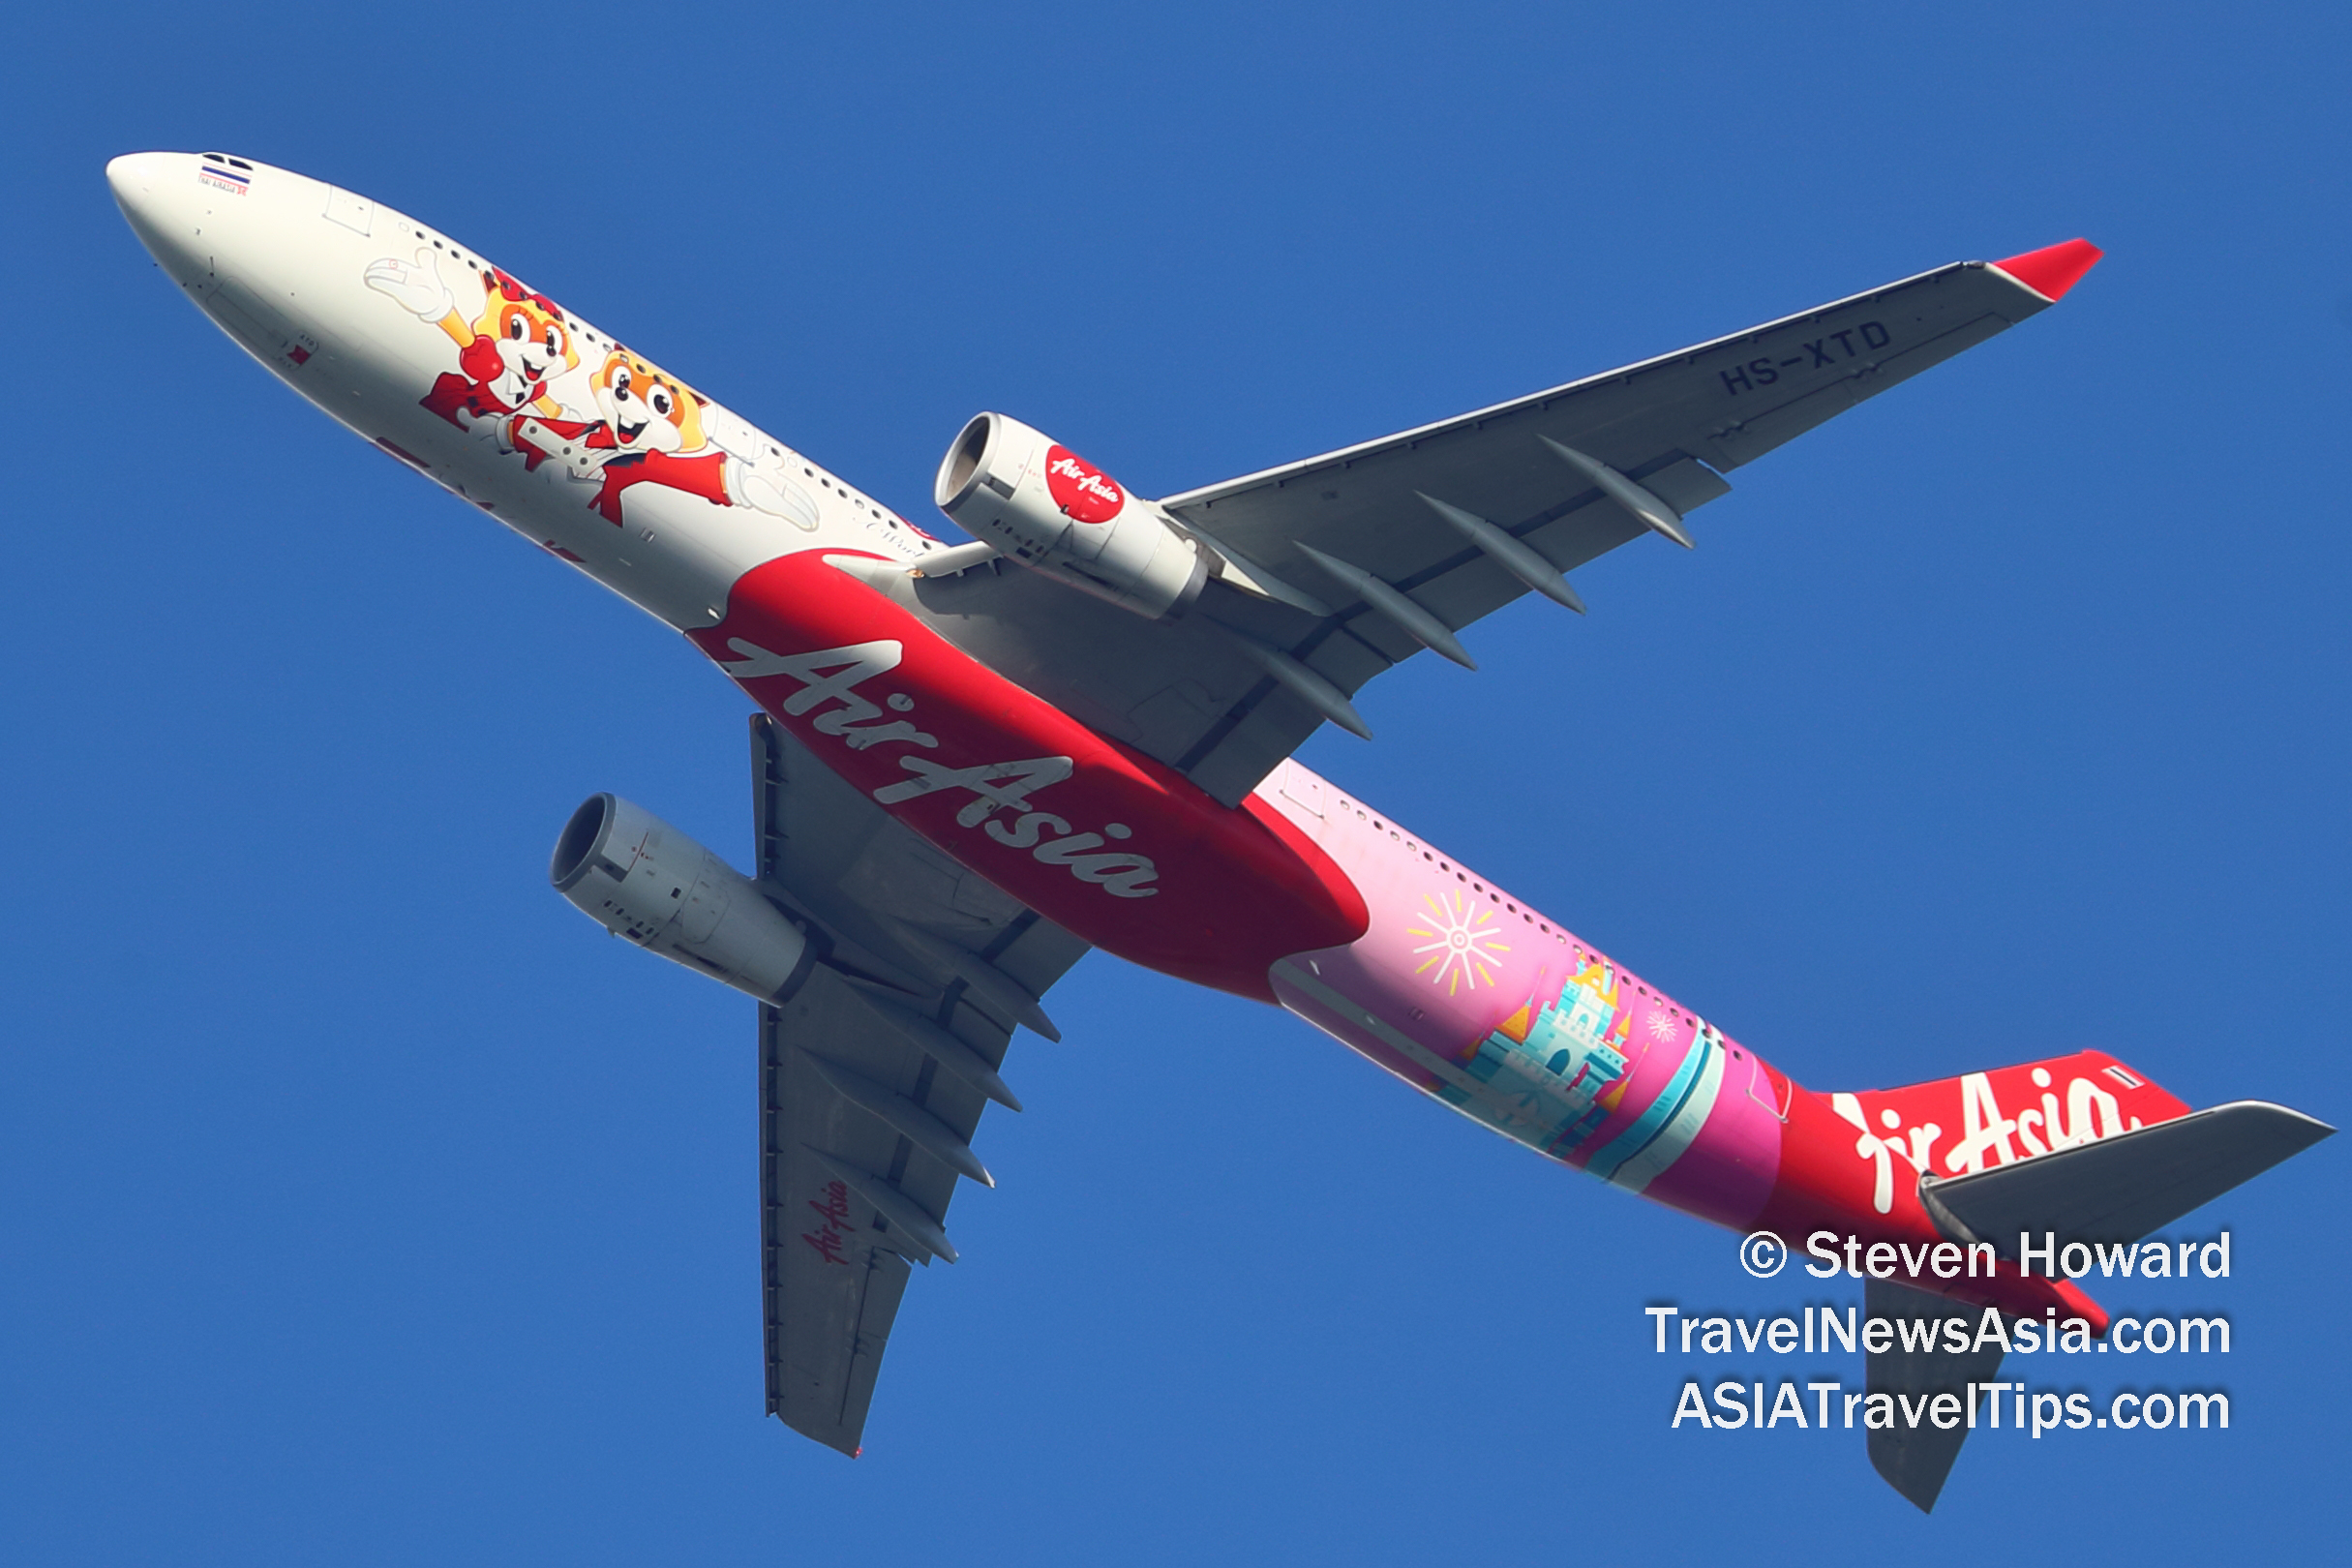 Thai AirAsia X Airbus A330 reg: HS-XTD. Picture by Steven Howard of TravelNewsAsia.com Click to enlarge.